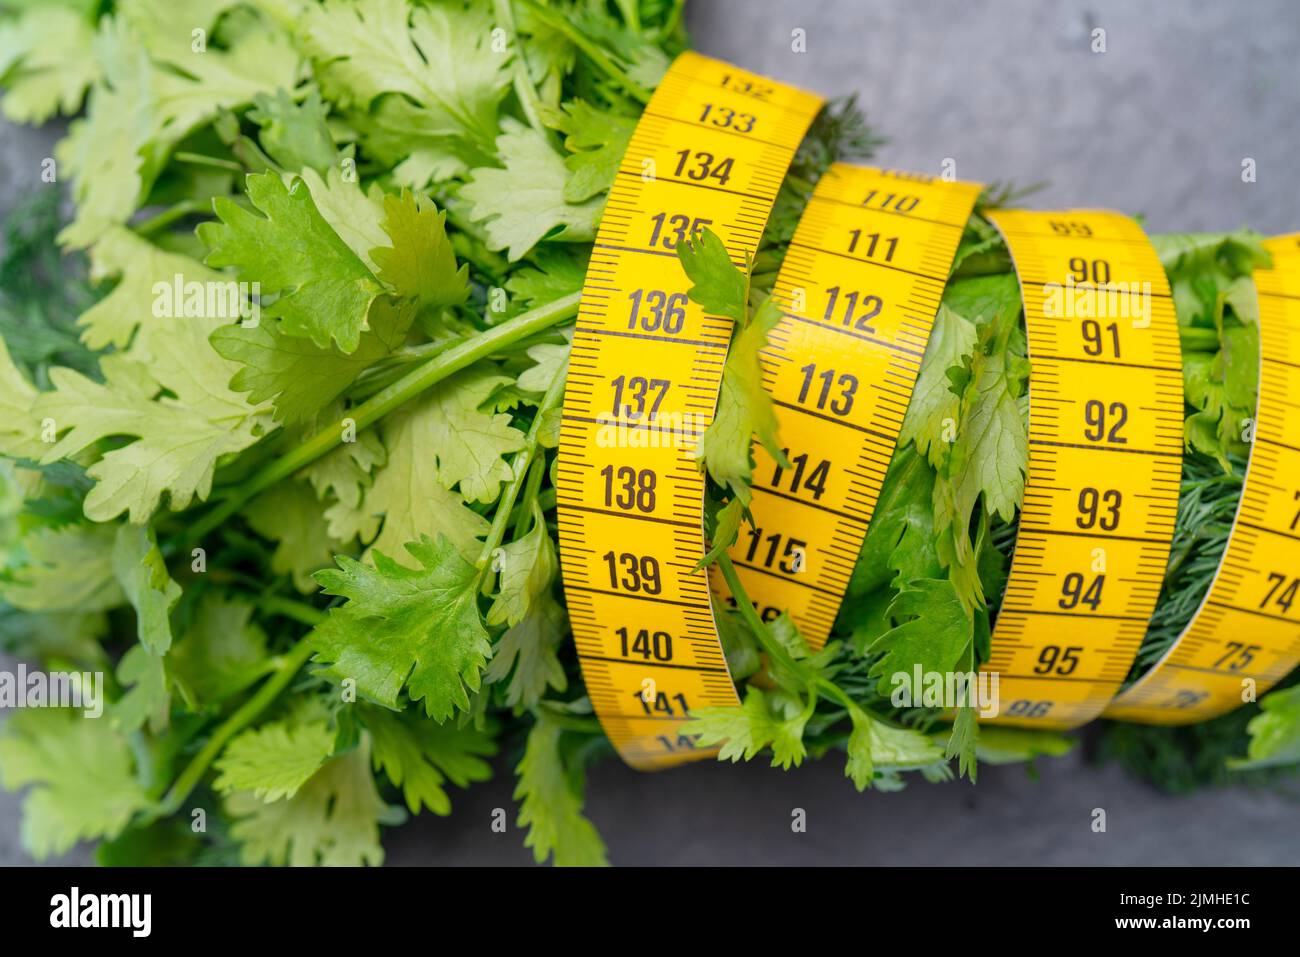 Measuring tape for measuring the circumference. Vegetables for diet cooking. Stock Photo